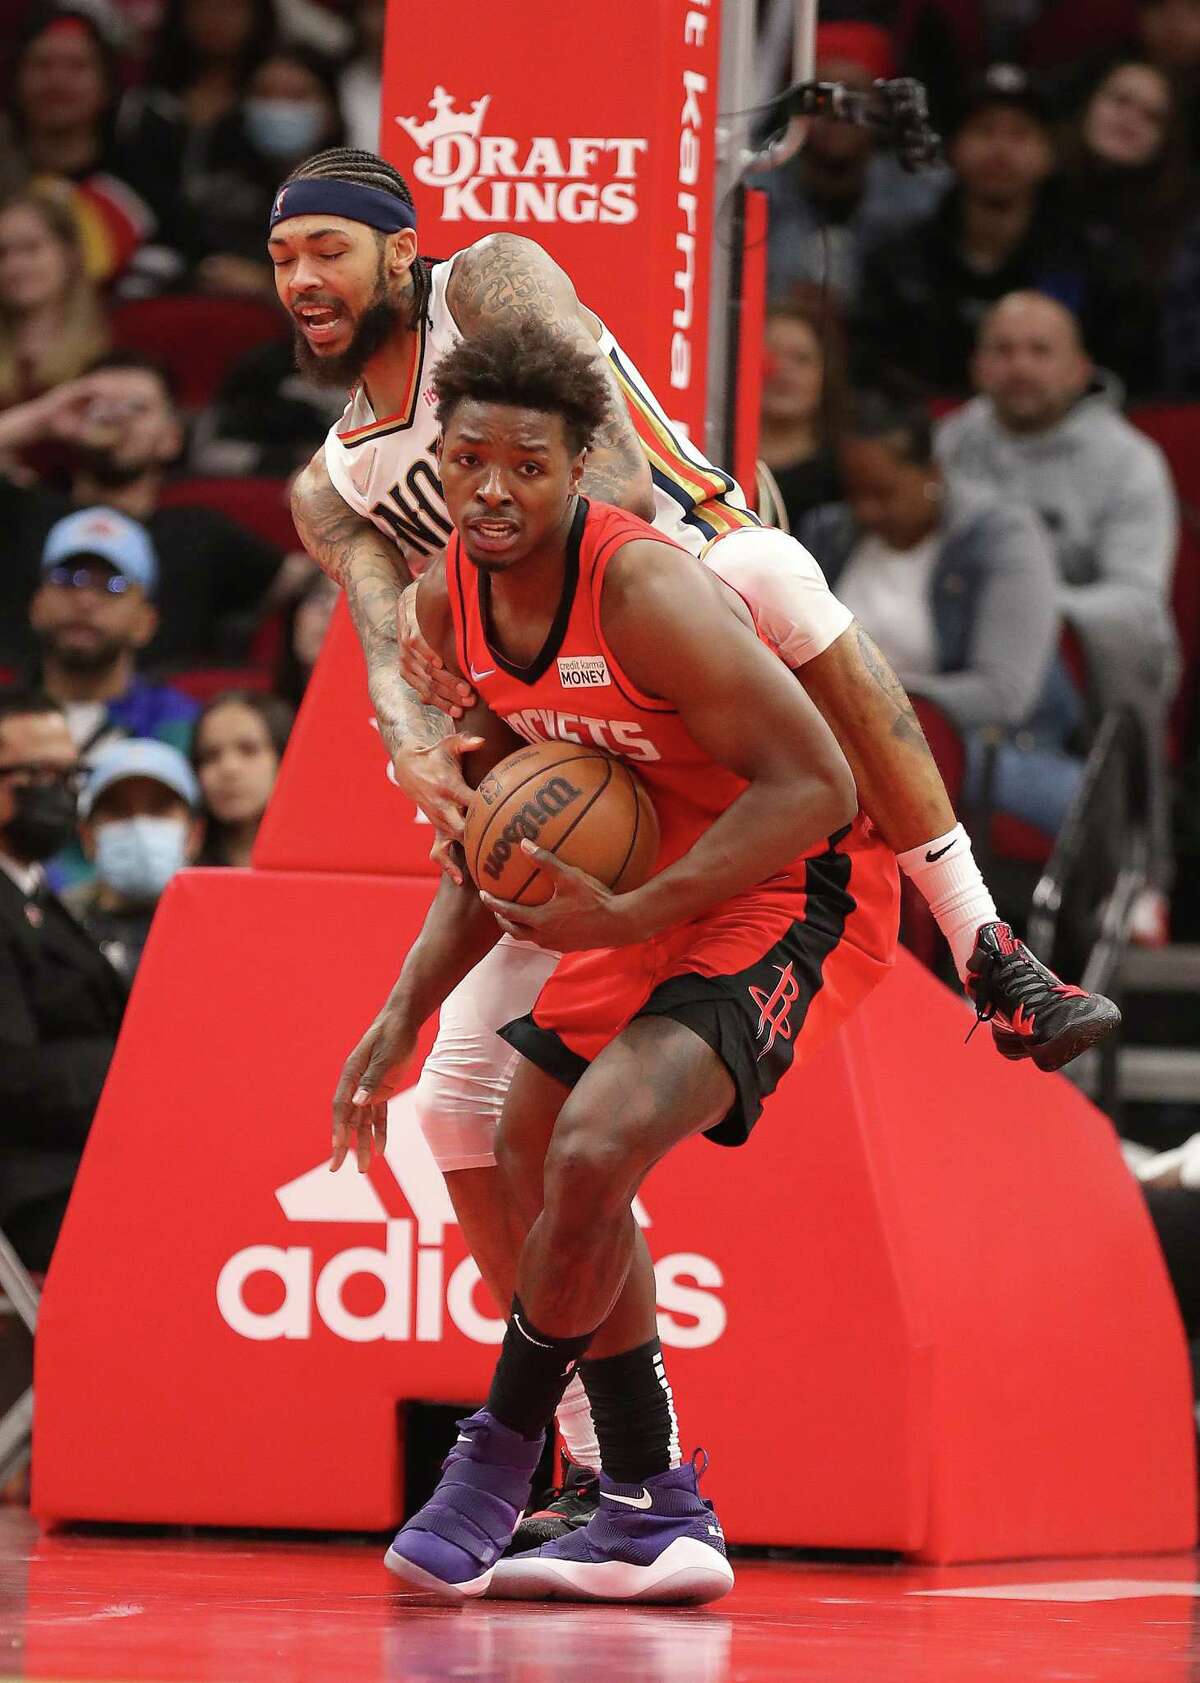 Houston Rockets forward Jae'Sean Tate (8) grabs a rebound against New Orleans Pelicans forward Brandon Ingram (14) during the second half of an NBA game at Toyota Center on Sunday, Feb. 6, 2022 in Houston.